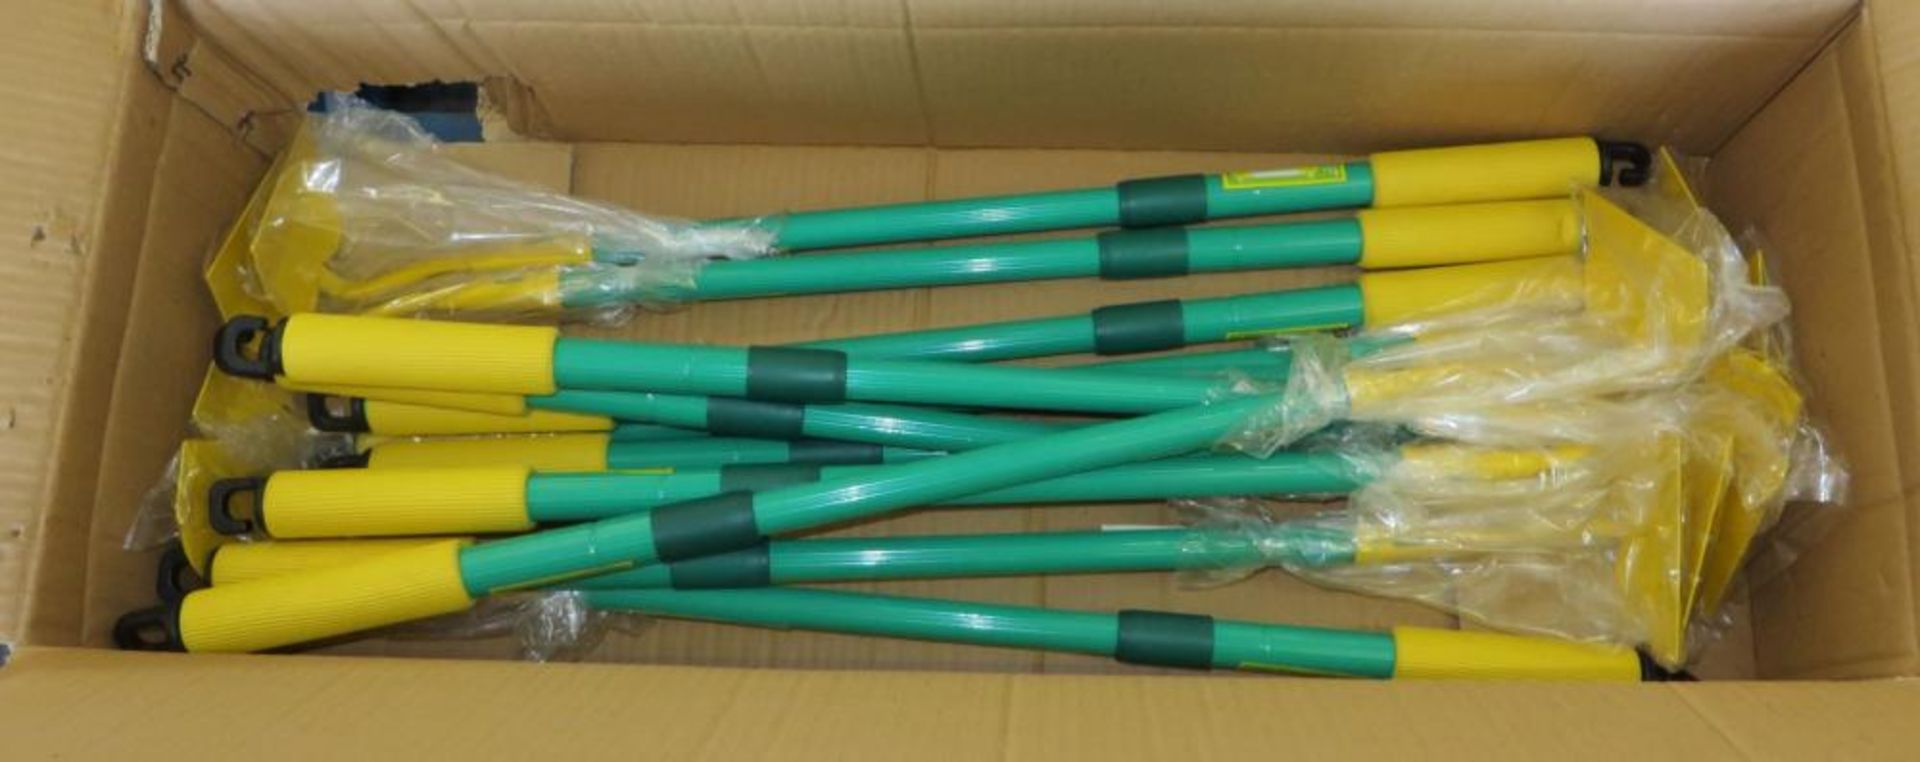 12 x Educational Infant Telescopic Hoes - New - CL185 - Ref: DRT0655 - Location: Stoke ST3